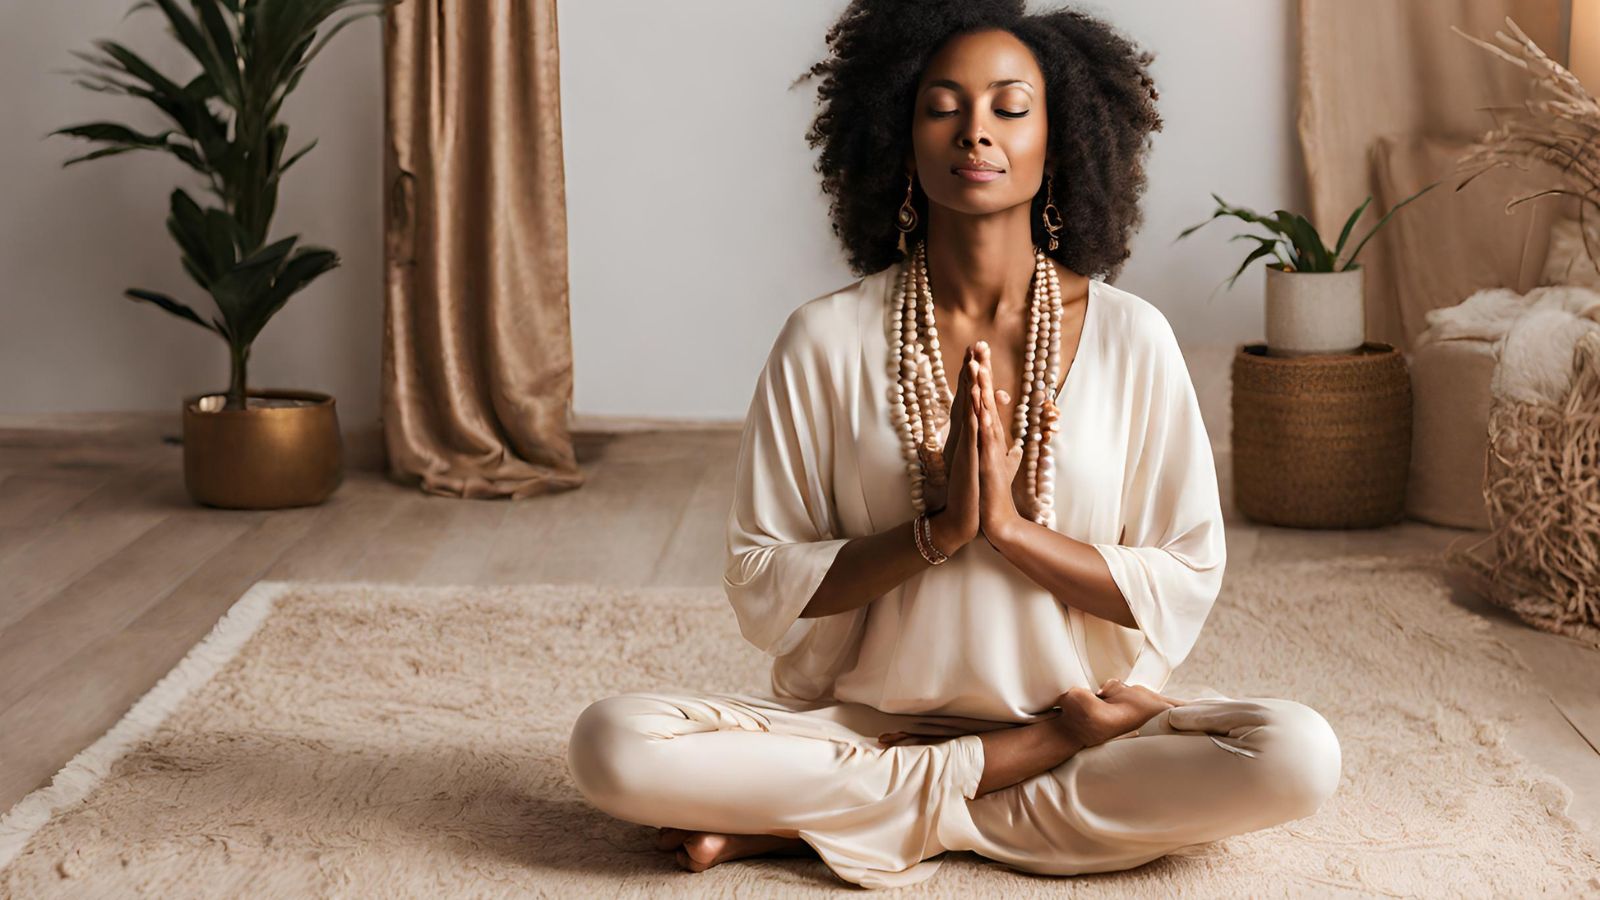 Lady meditating with a mala beads necklace